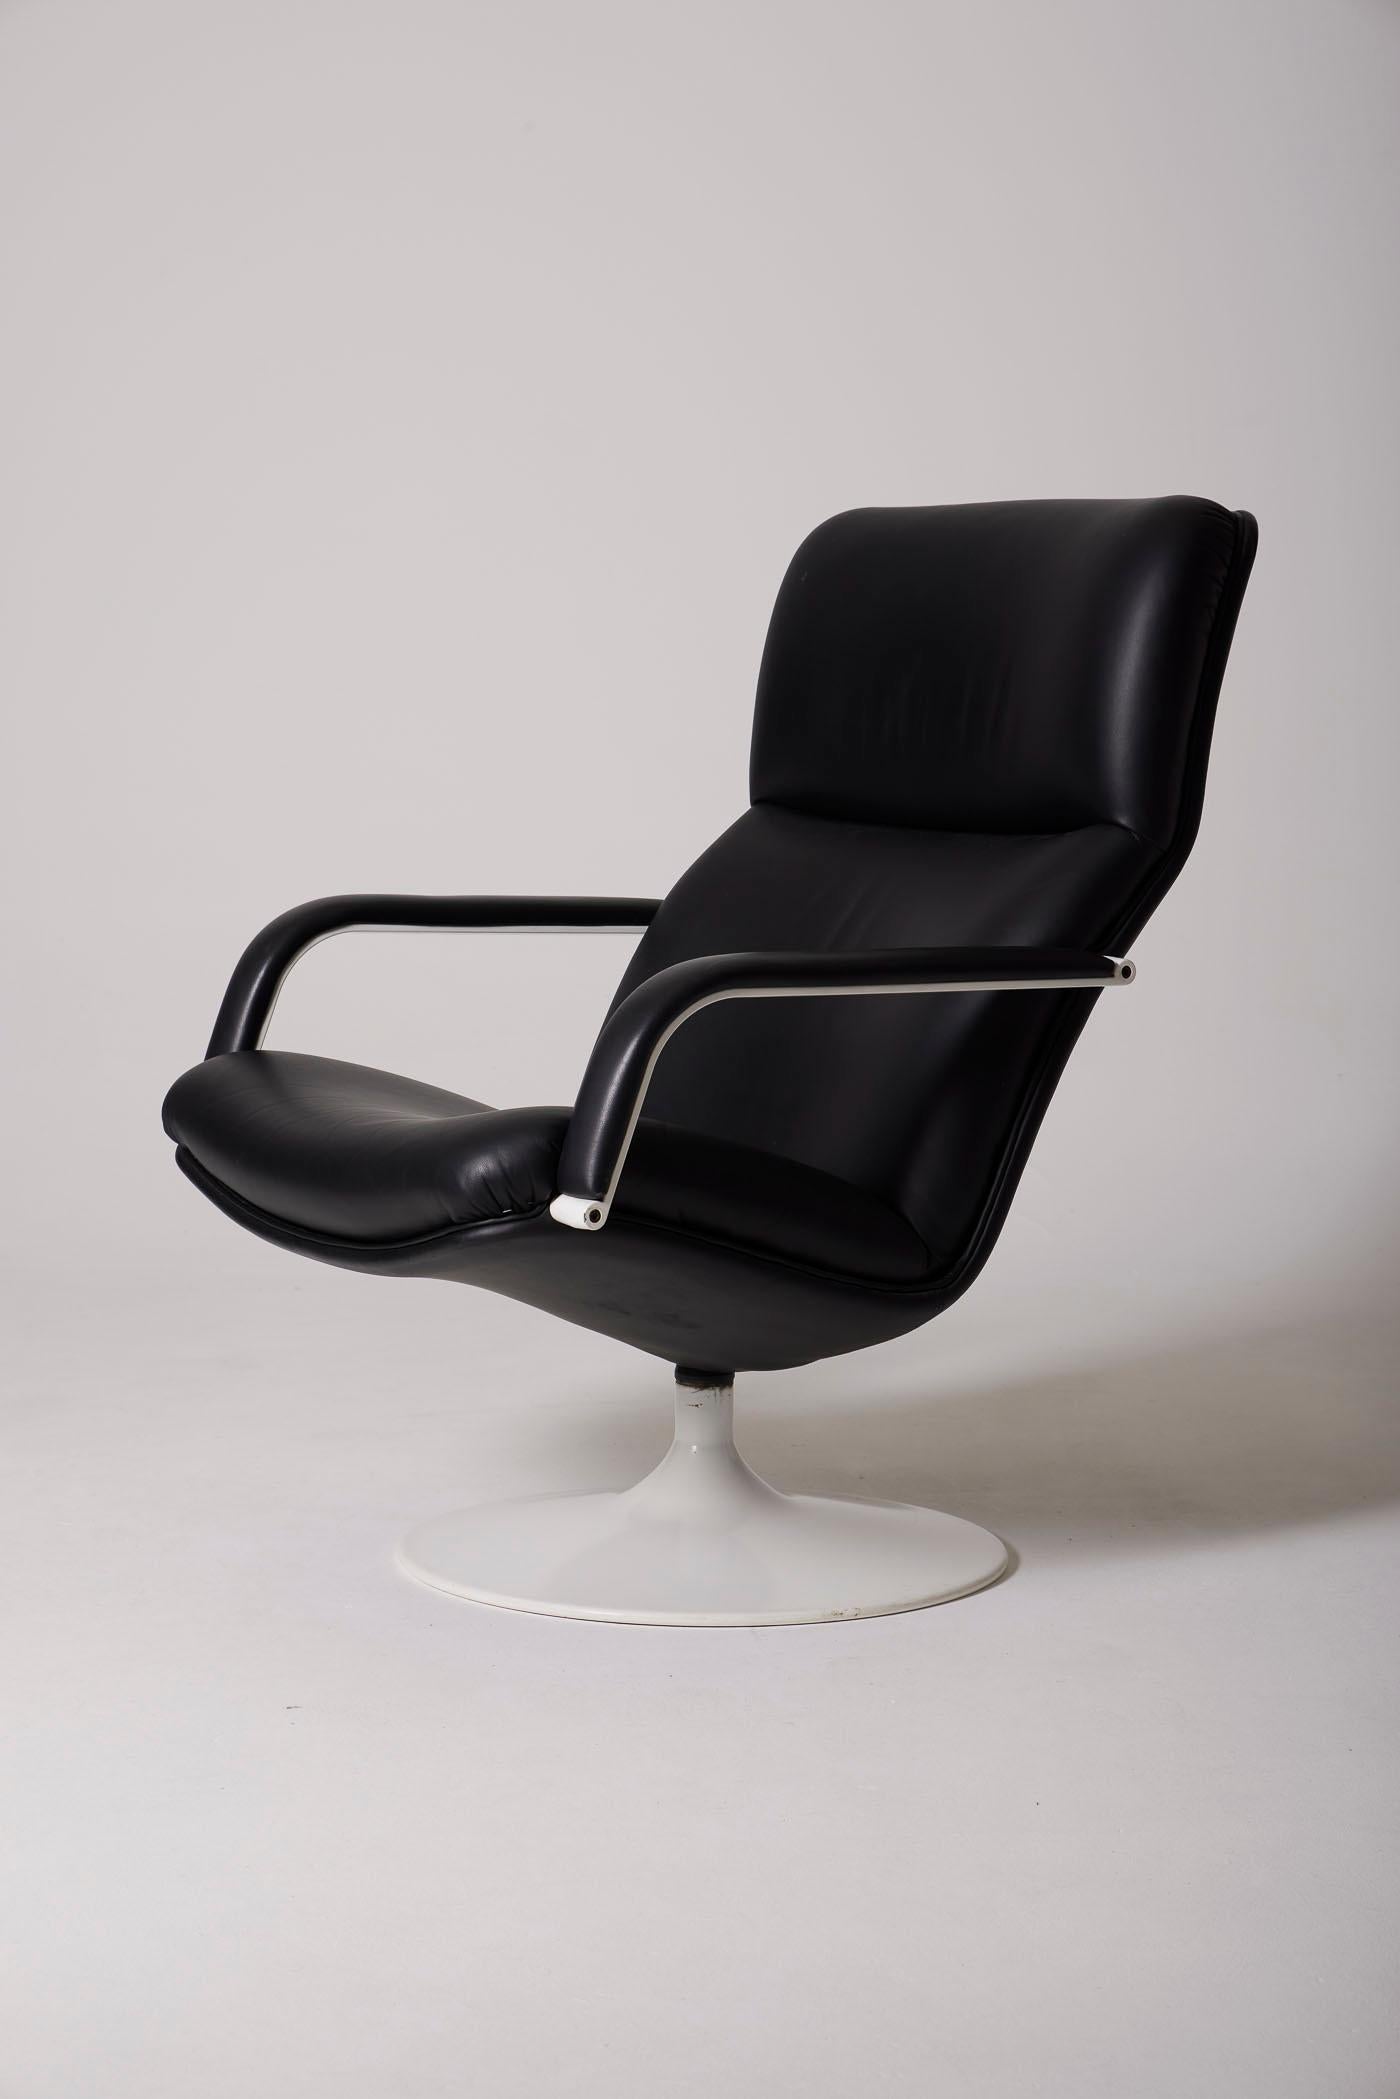 Armchair 'F142' by designer Geoffrey Harcourt for Artifort. The seat and back are covered in black leather. The base is in white lacquered metal. In good condition.
DV434